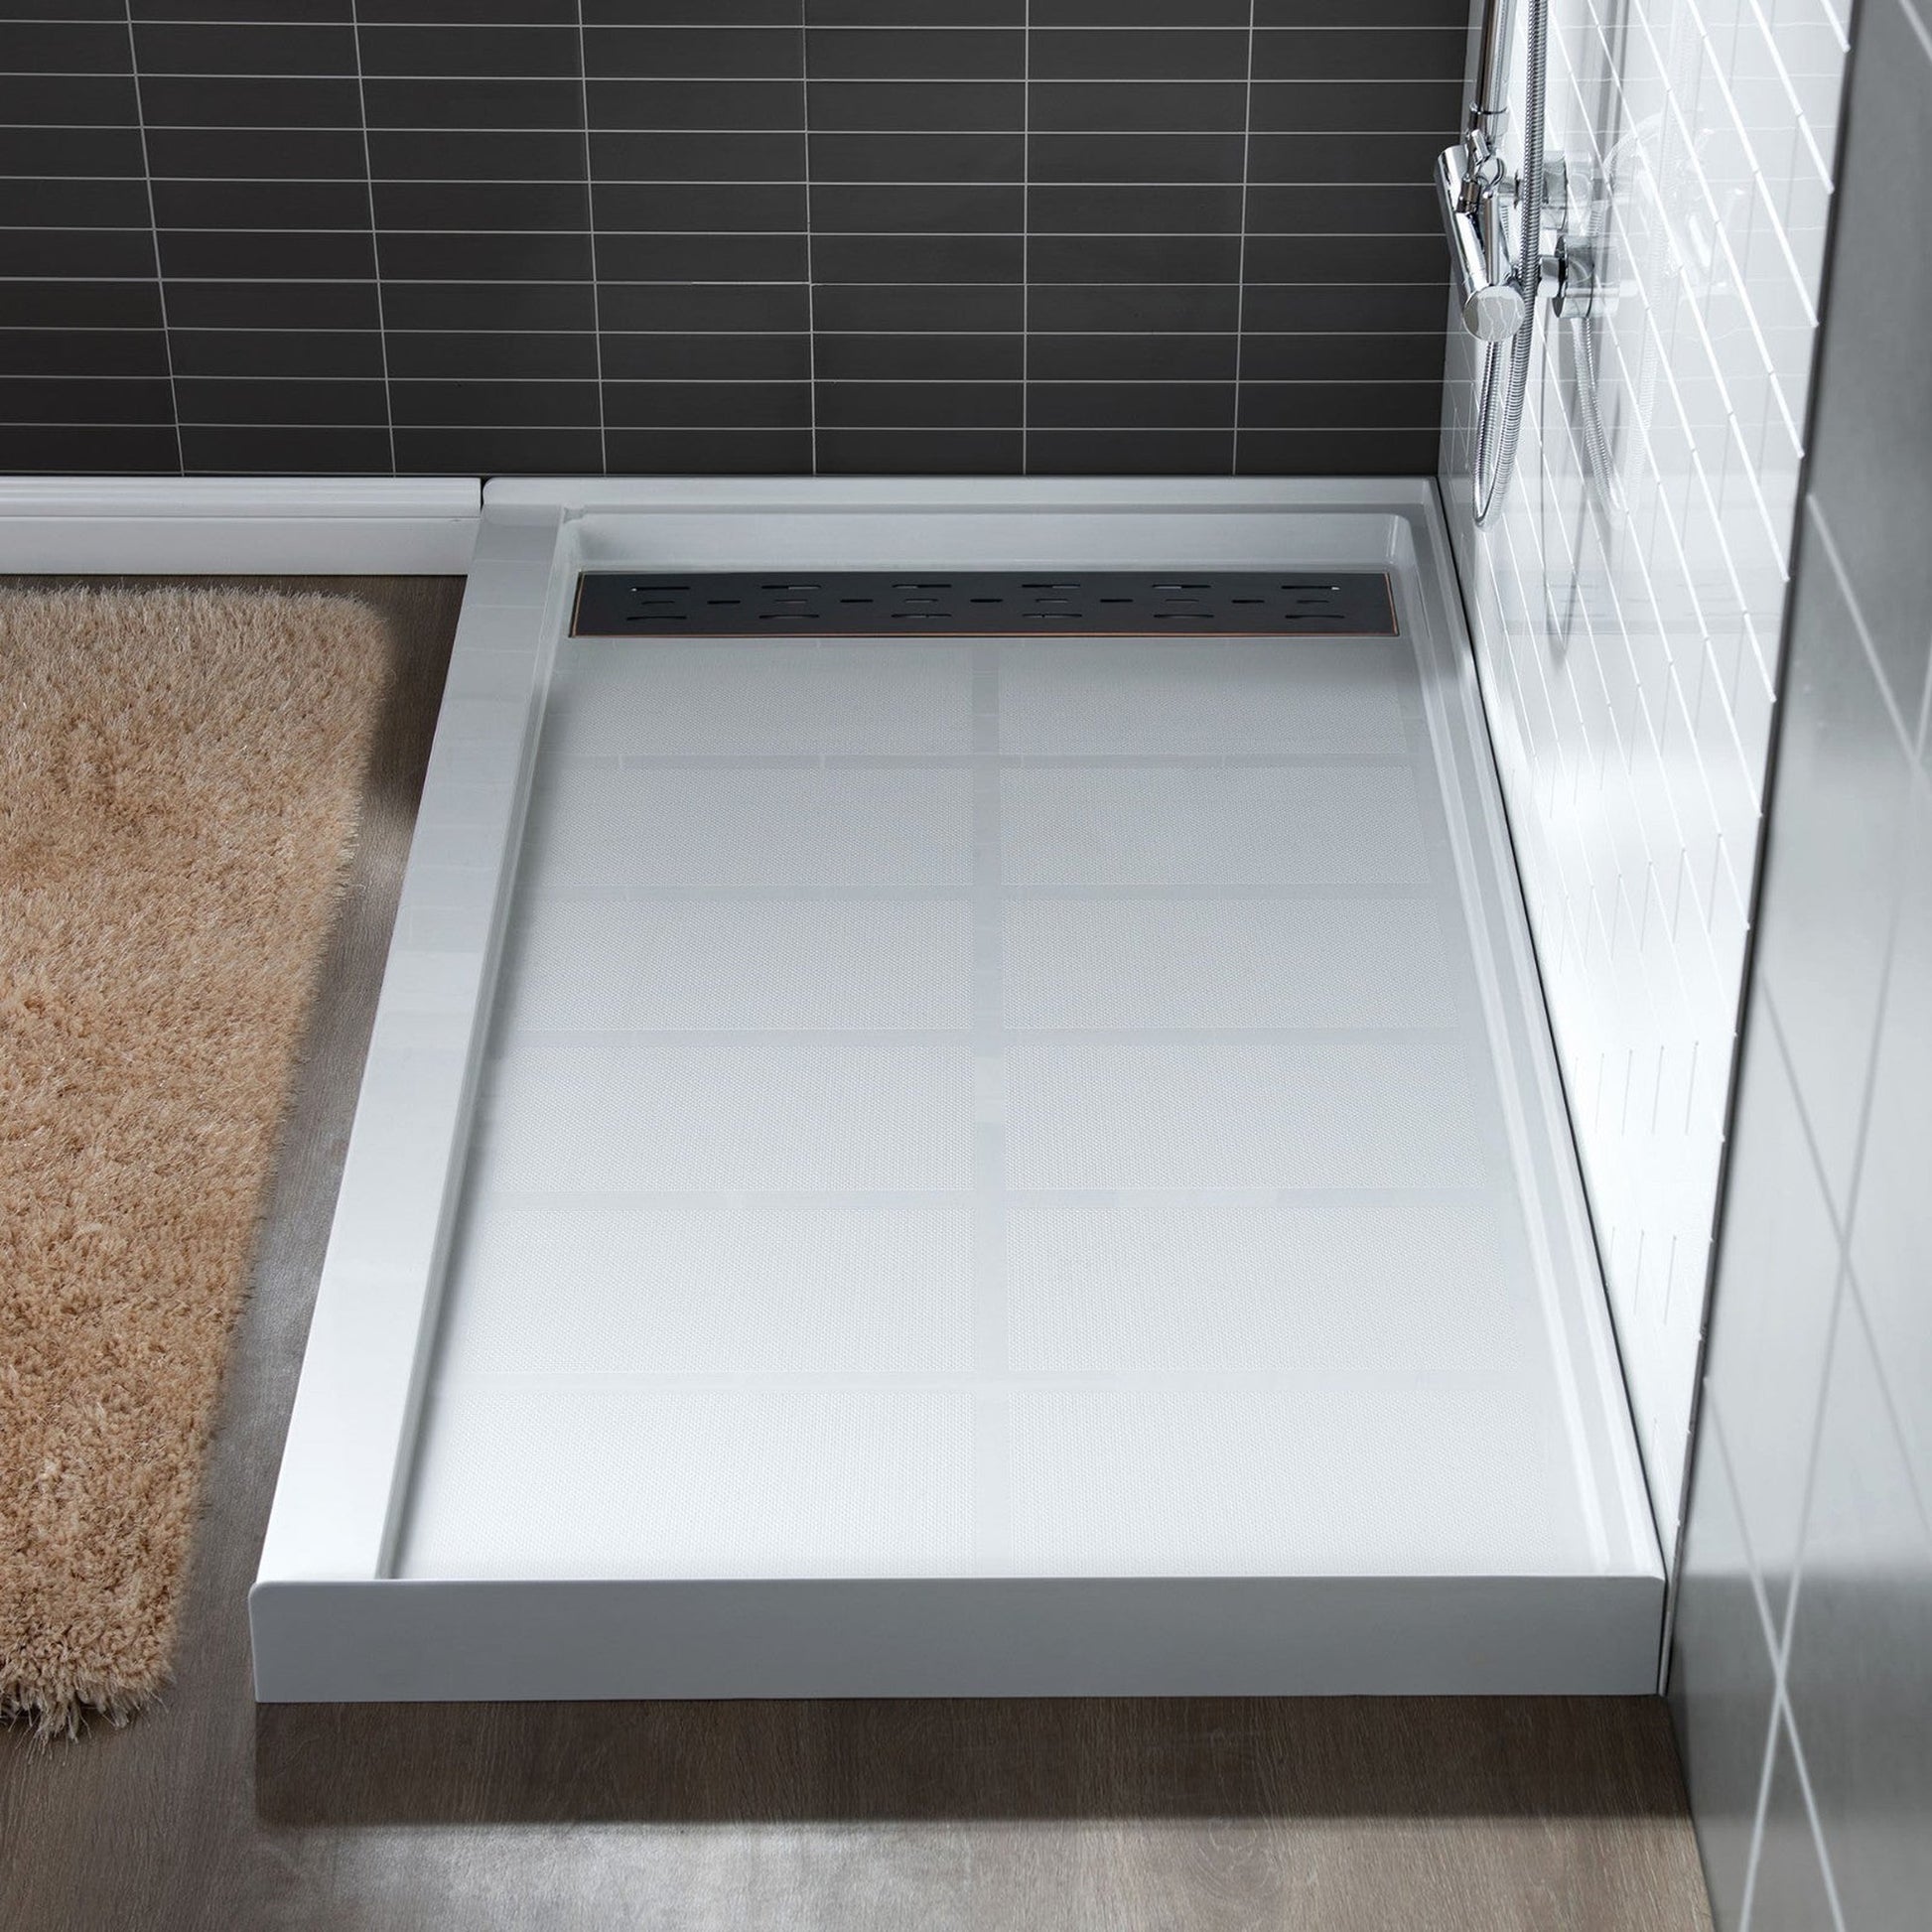 WoodBridge 48" x 32" White Solid Surface Shower Base Left Drain Location With Oil Rubbed Bronze Trench Drain Cover